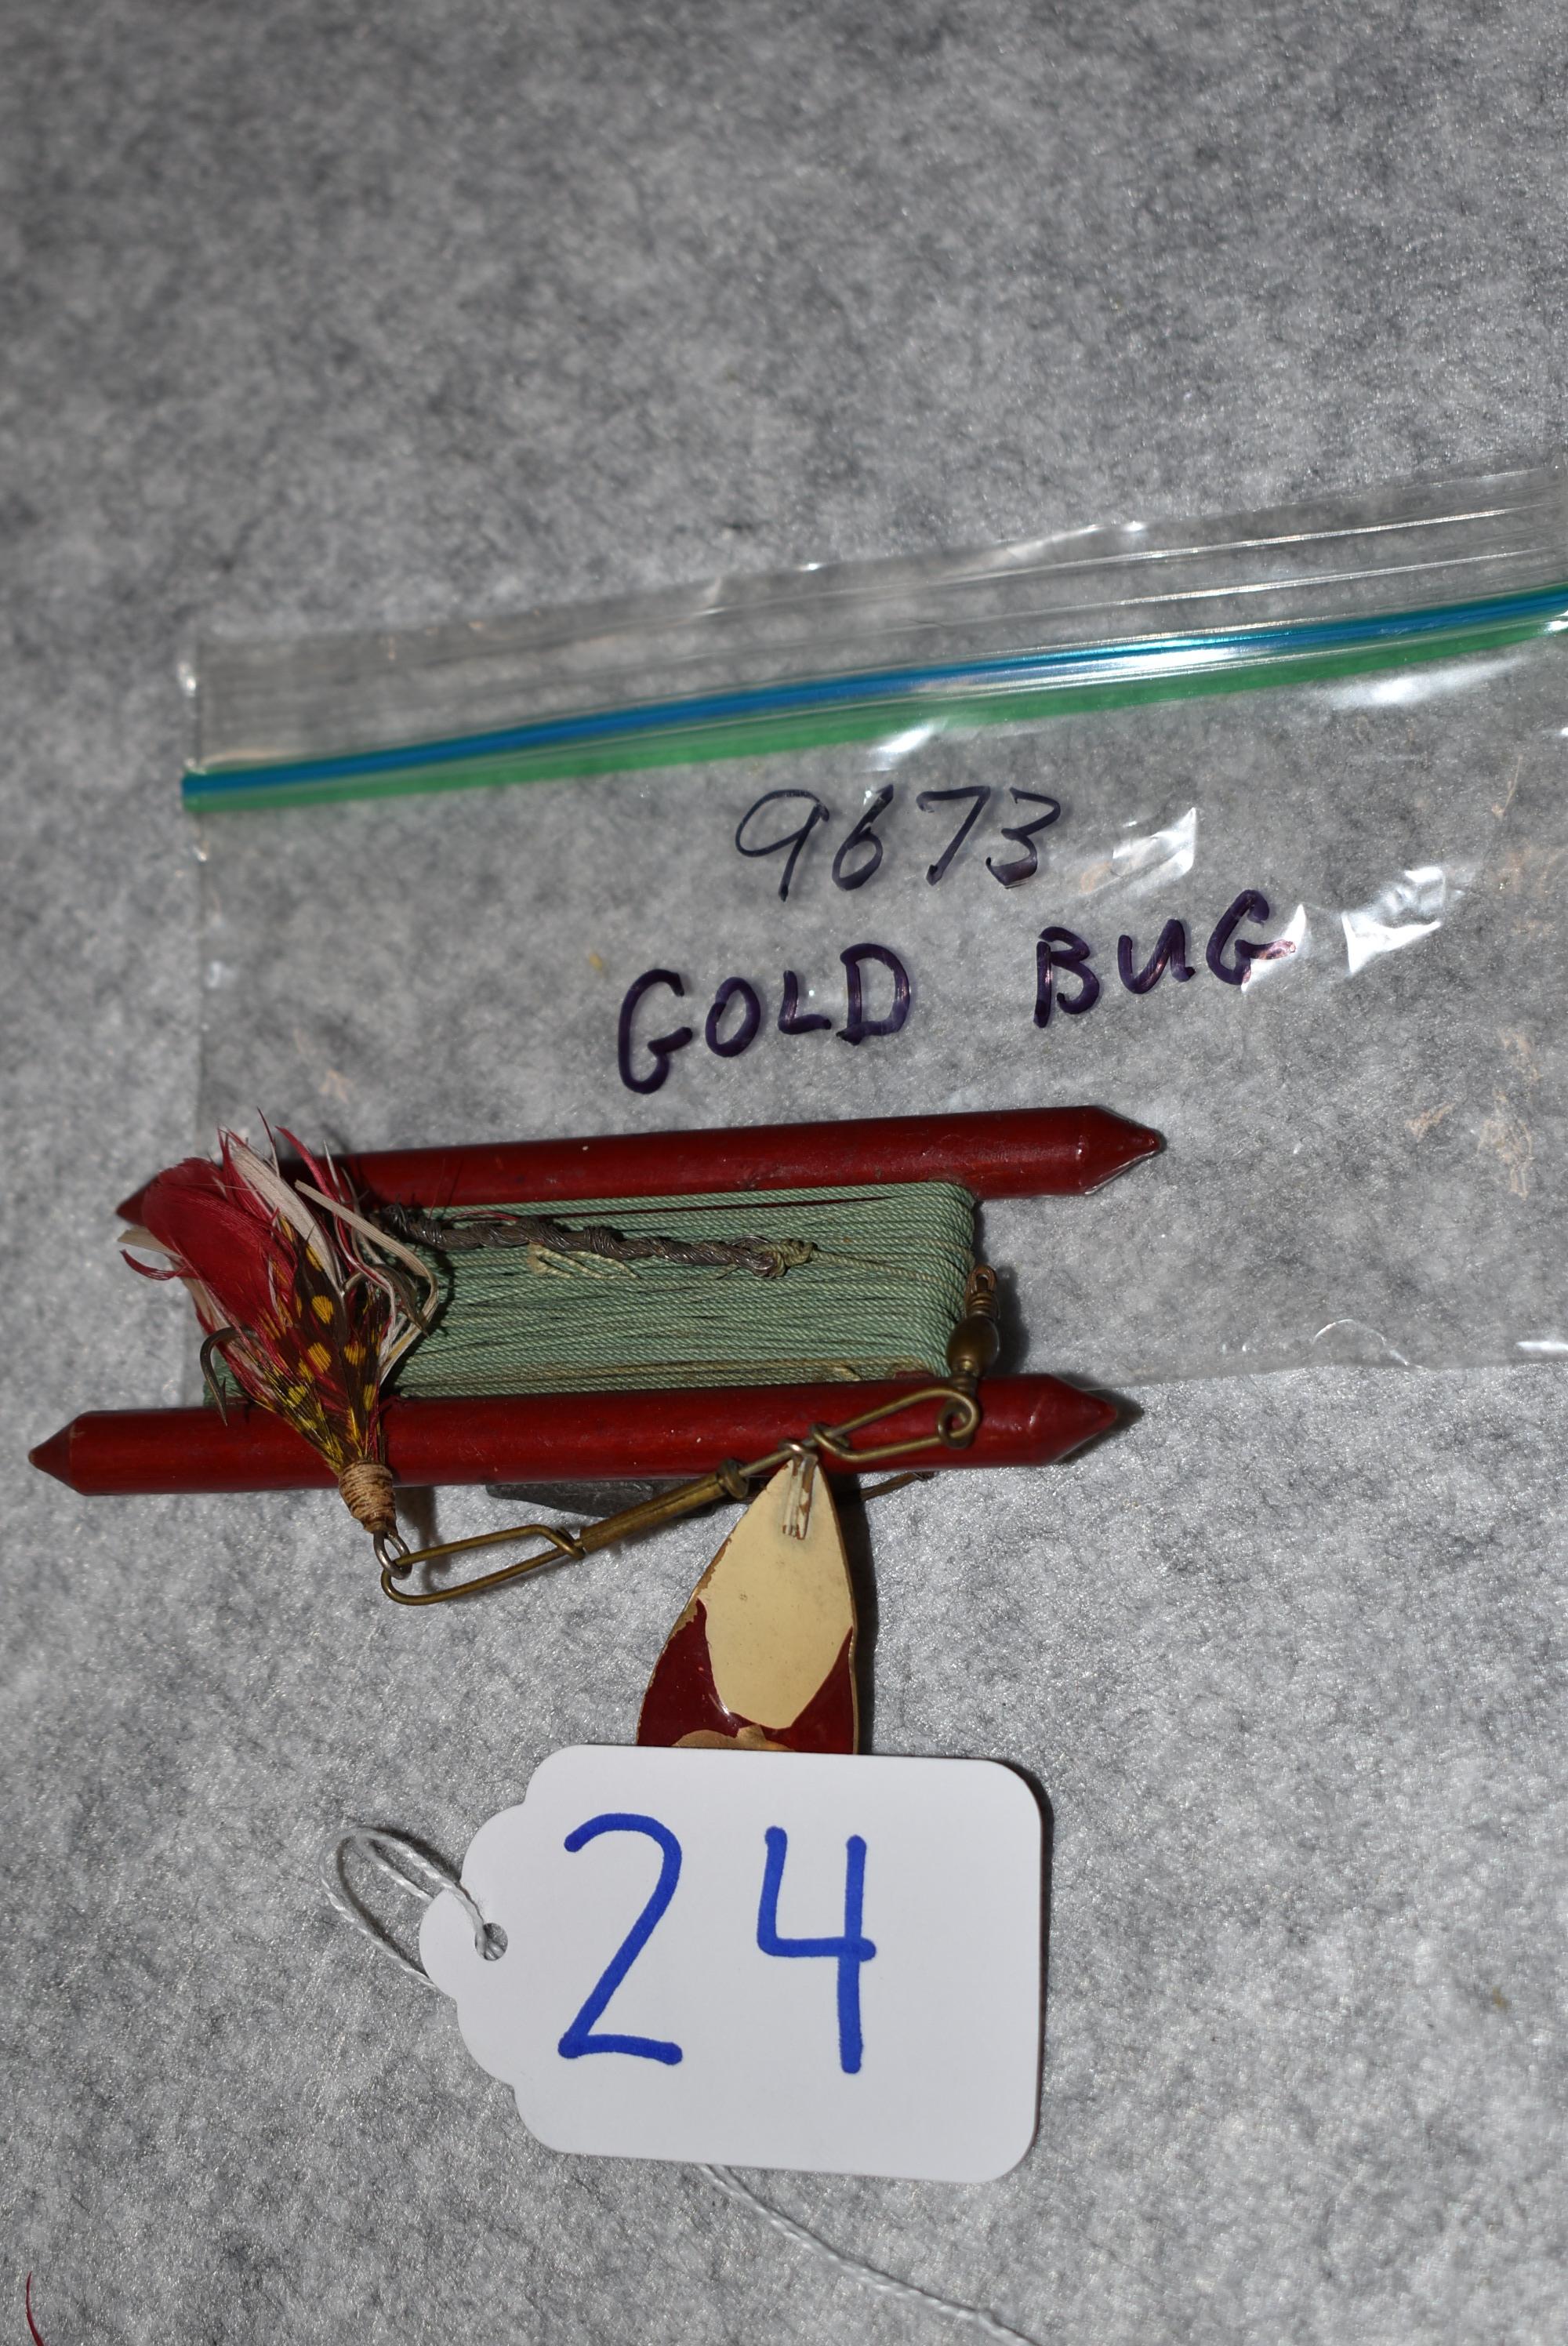 Winchester – No. 9673 Gold Bug Fishing Lure w/Winder